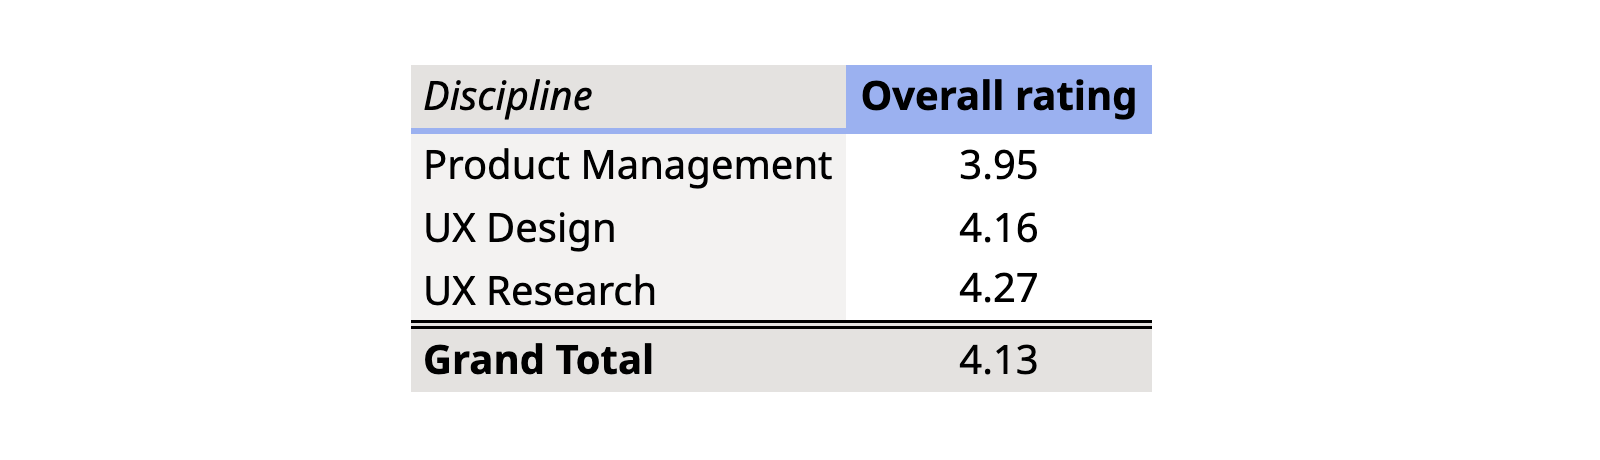 Averaged scores for content designers: 3.95 from product managers, 4.16 from designers, 4.27 from researchers, 4.13 overall